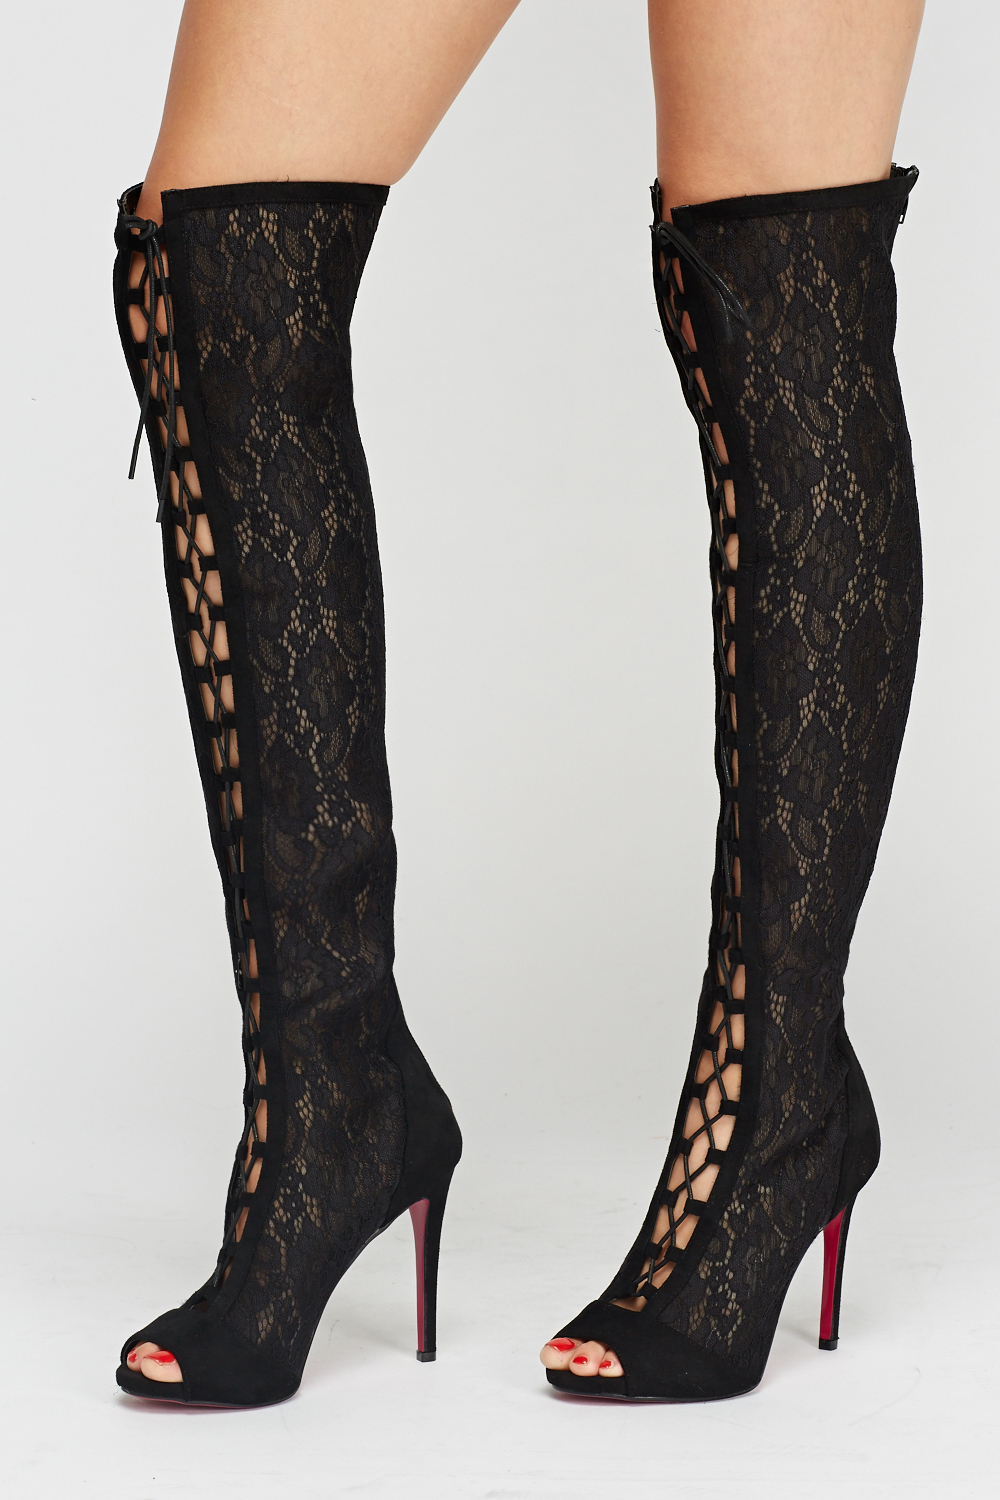 Wlady Mesh Lace Up Over The Knee Boots - Limited edition | Discount ...